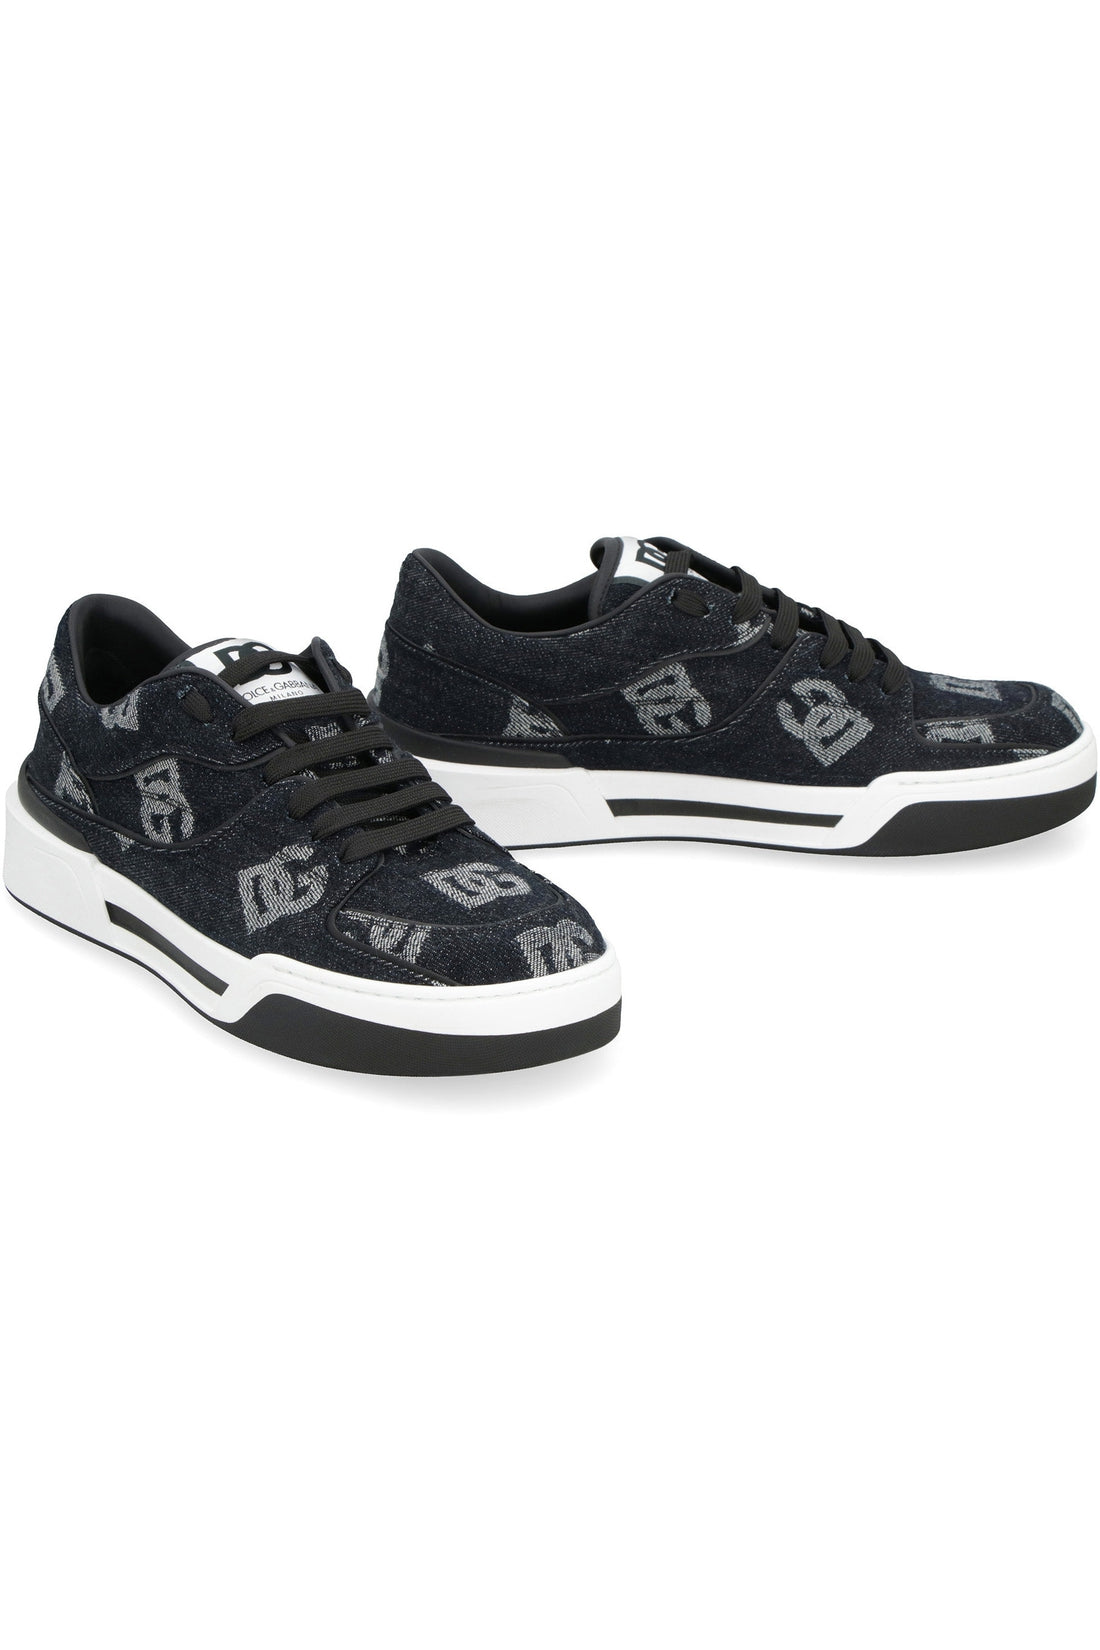 Dolce & Gabbana-OUTLET-SALE-New Roma low-top sneakers-ARCHIVIST